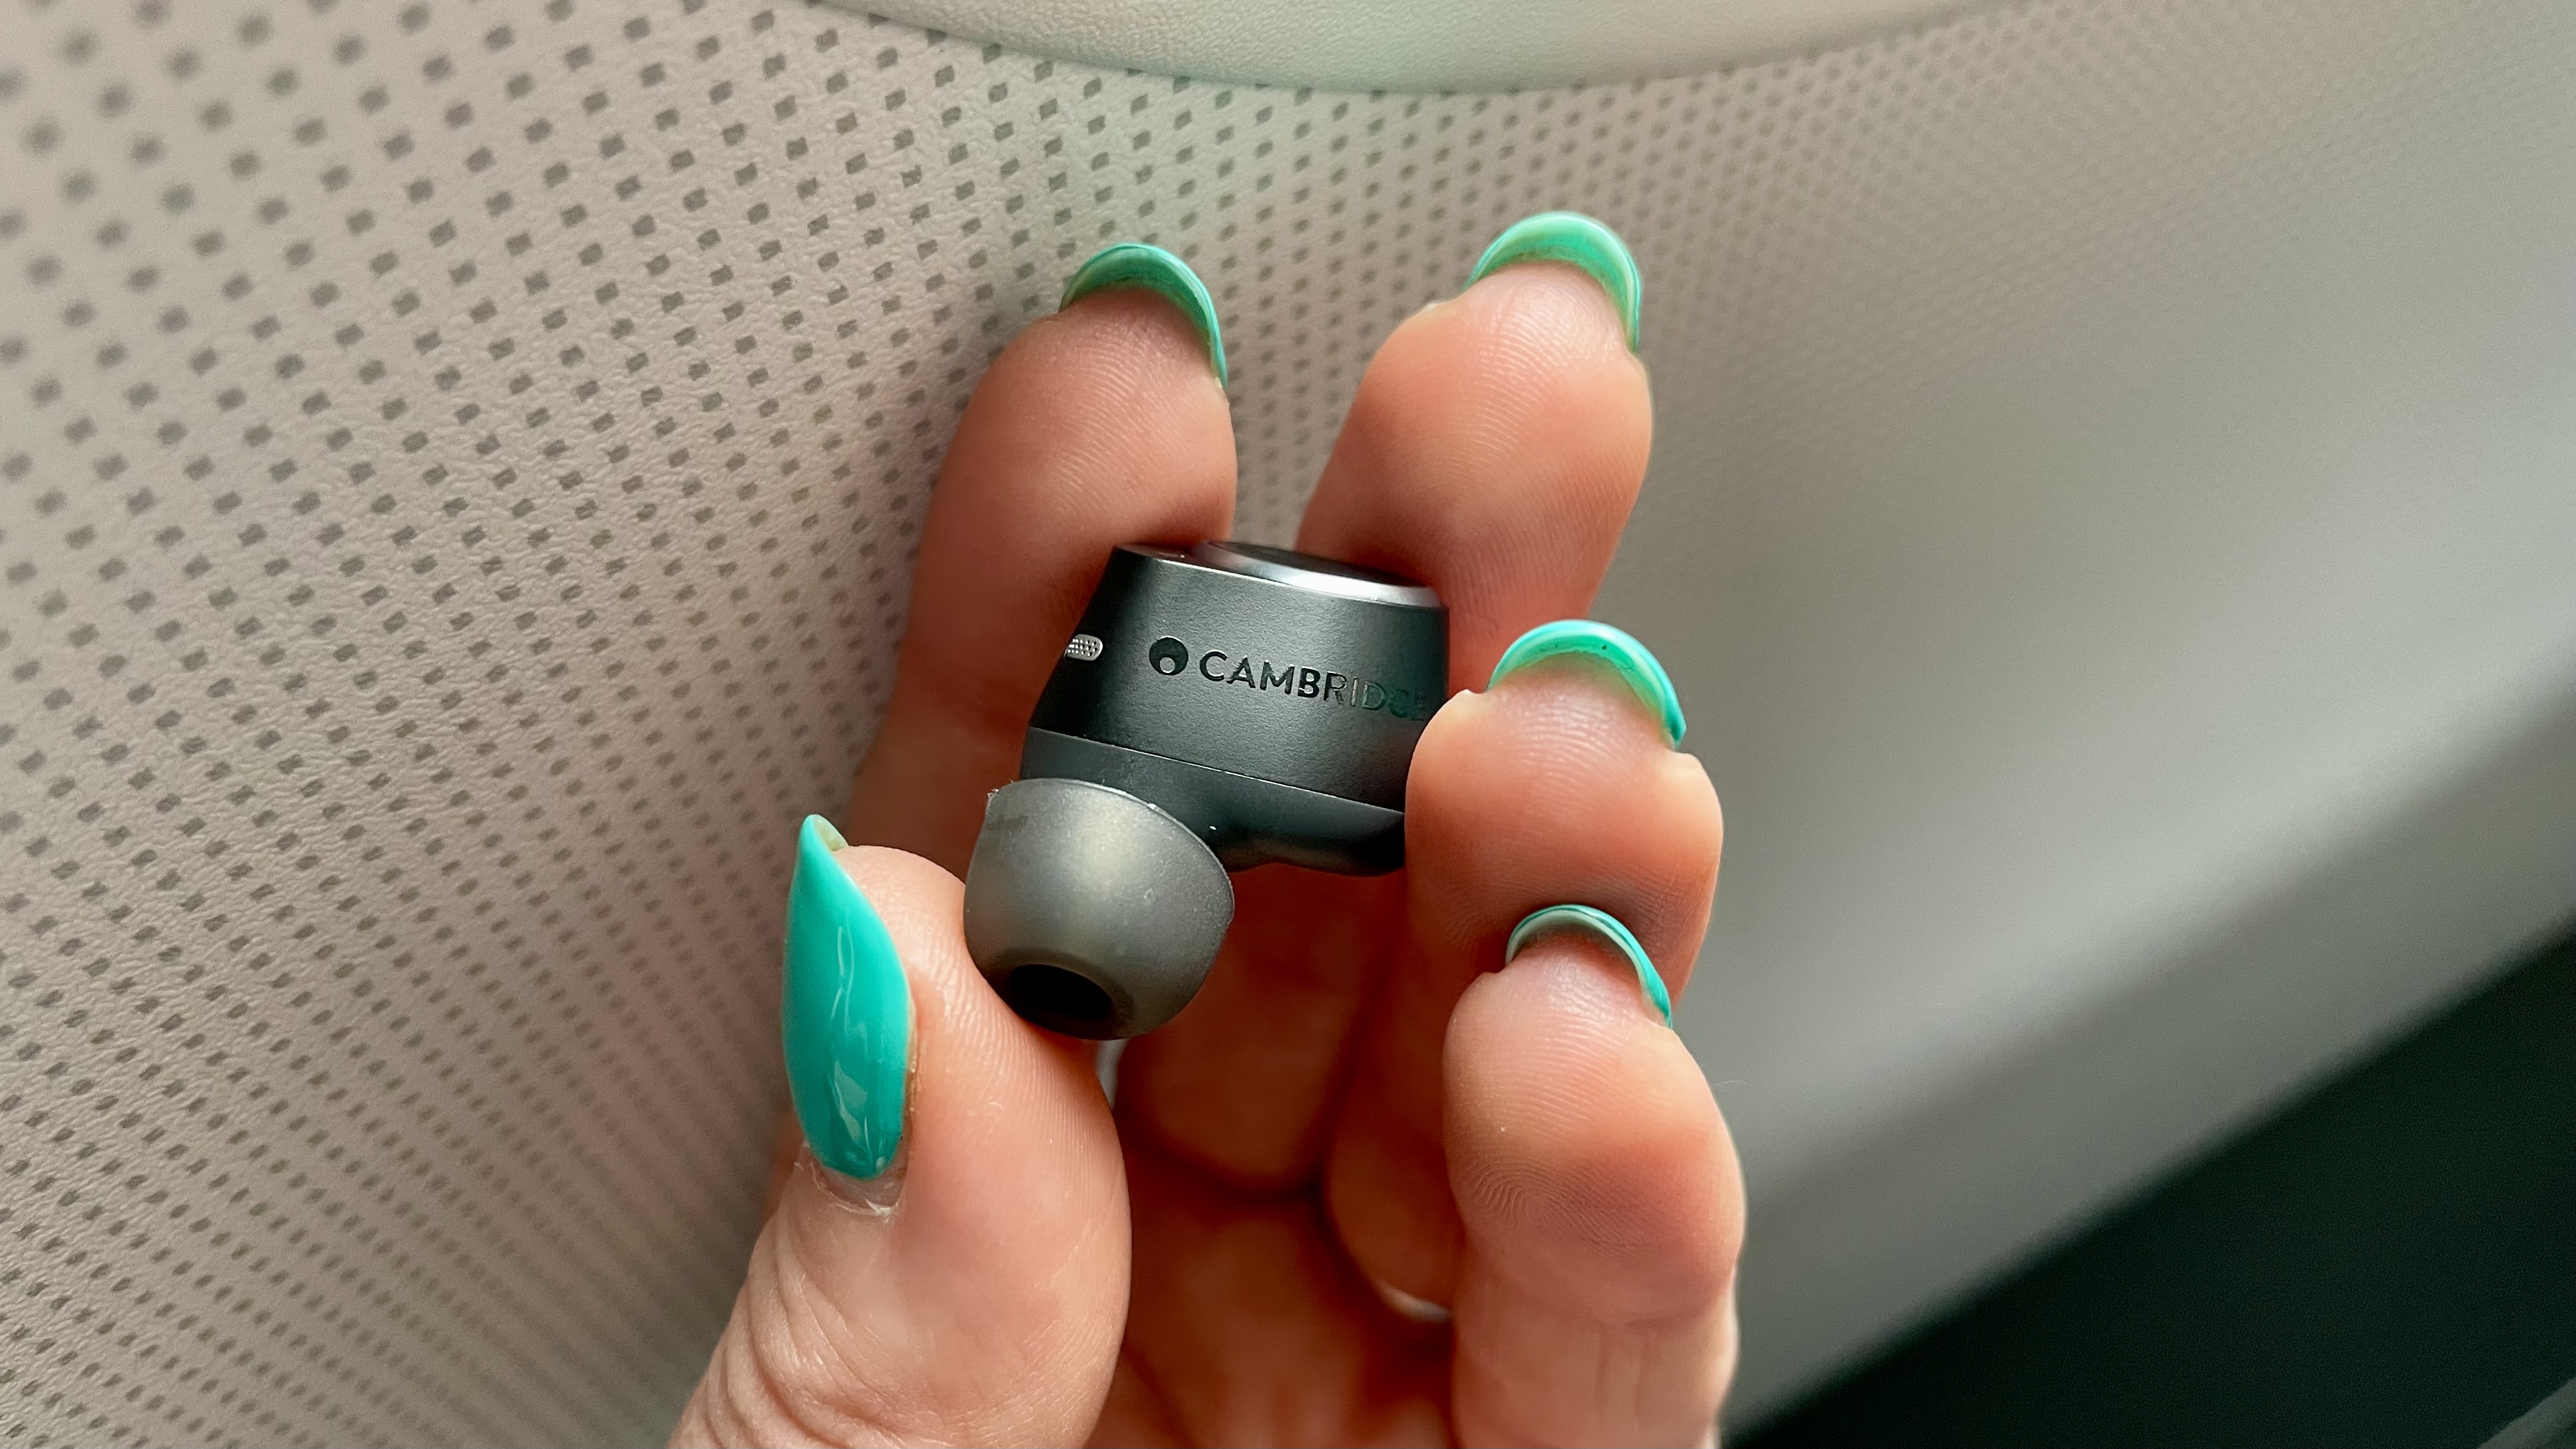 Cambridge Audio Melomania M100 one earbud, held in a hand